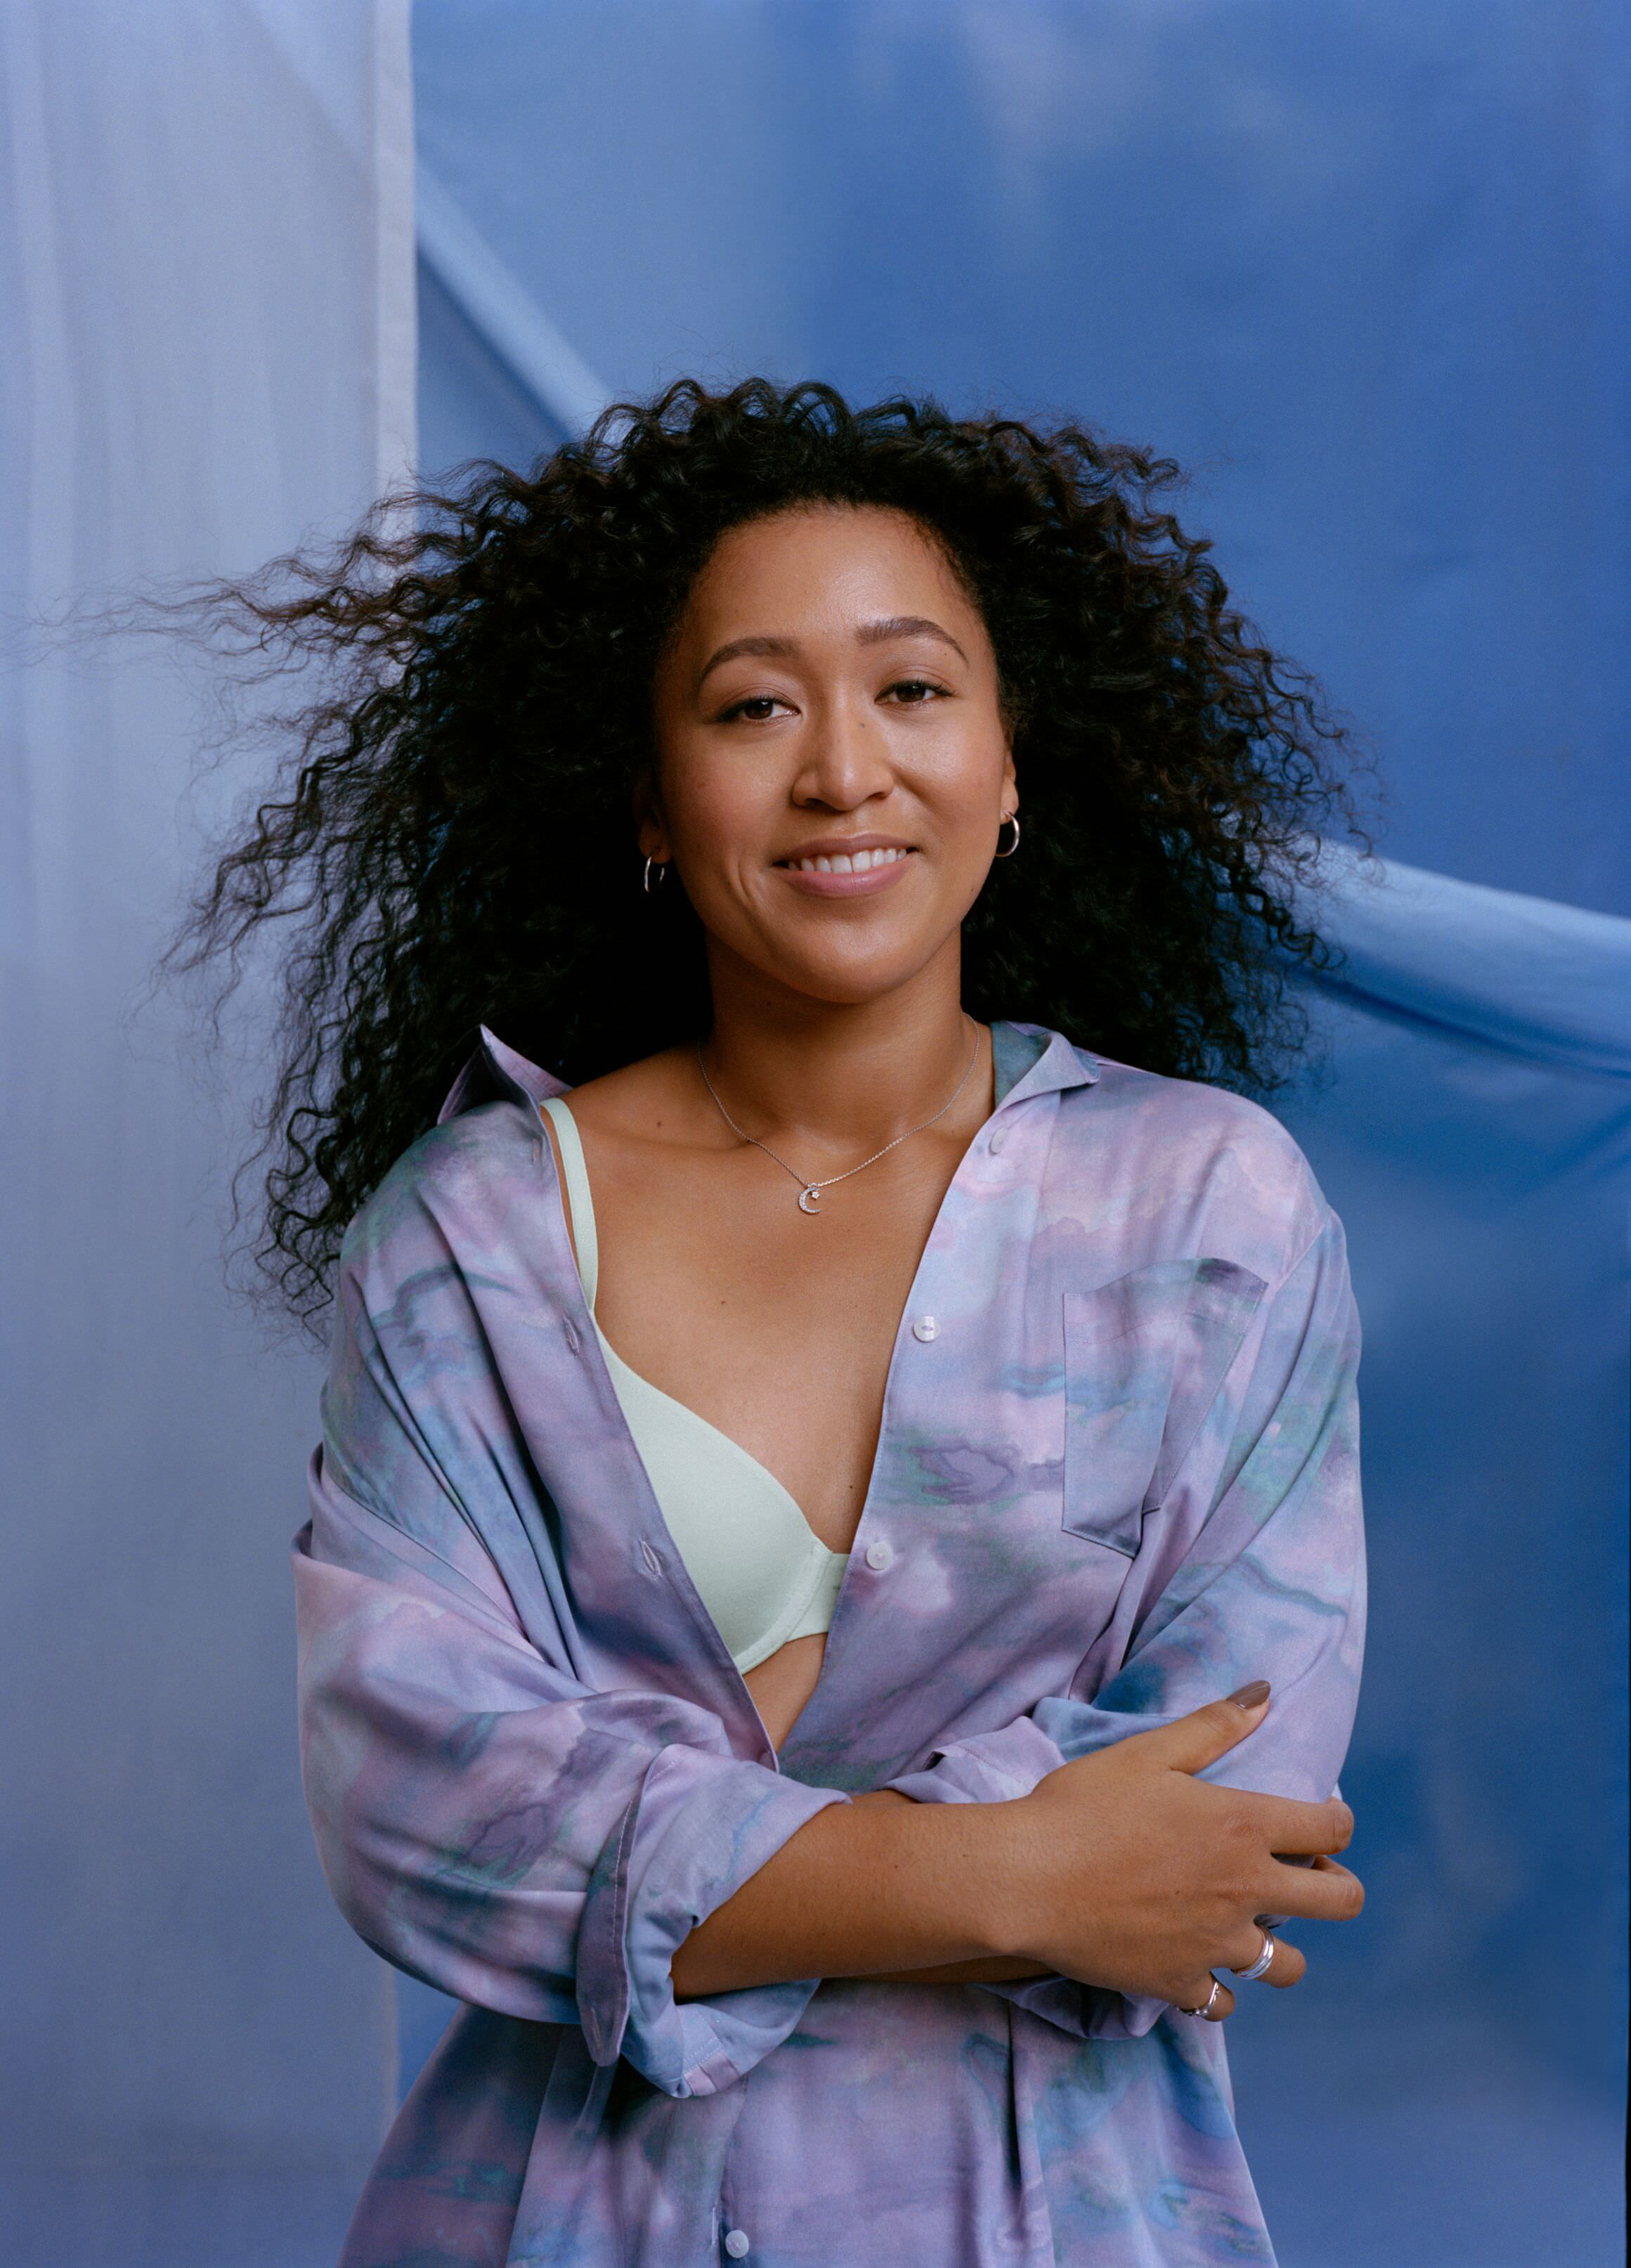 The Naomi Osaka x Victoria's Secret Collection Is All About Rest